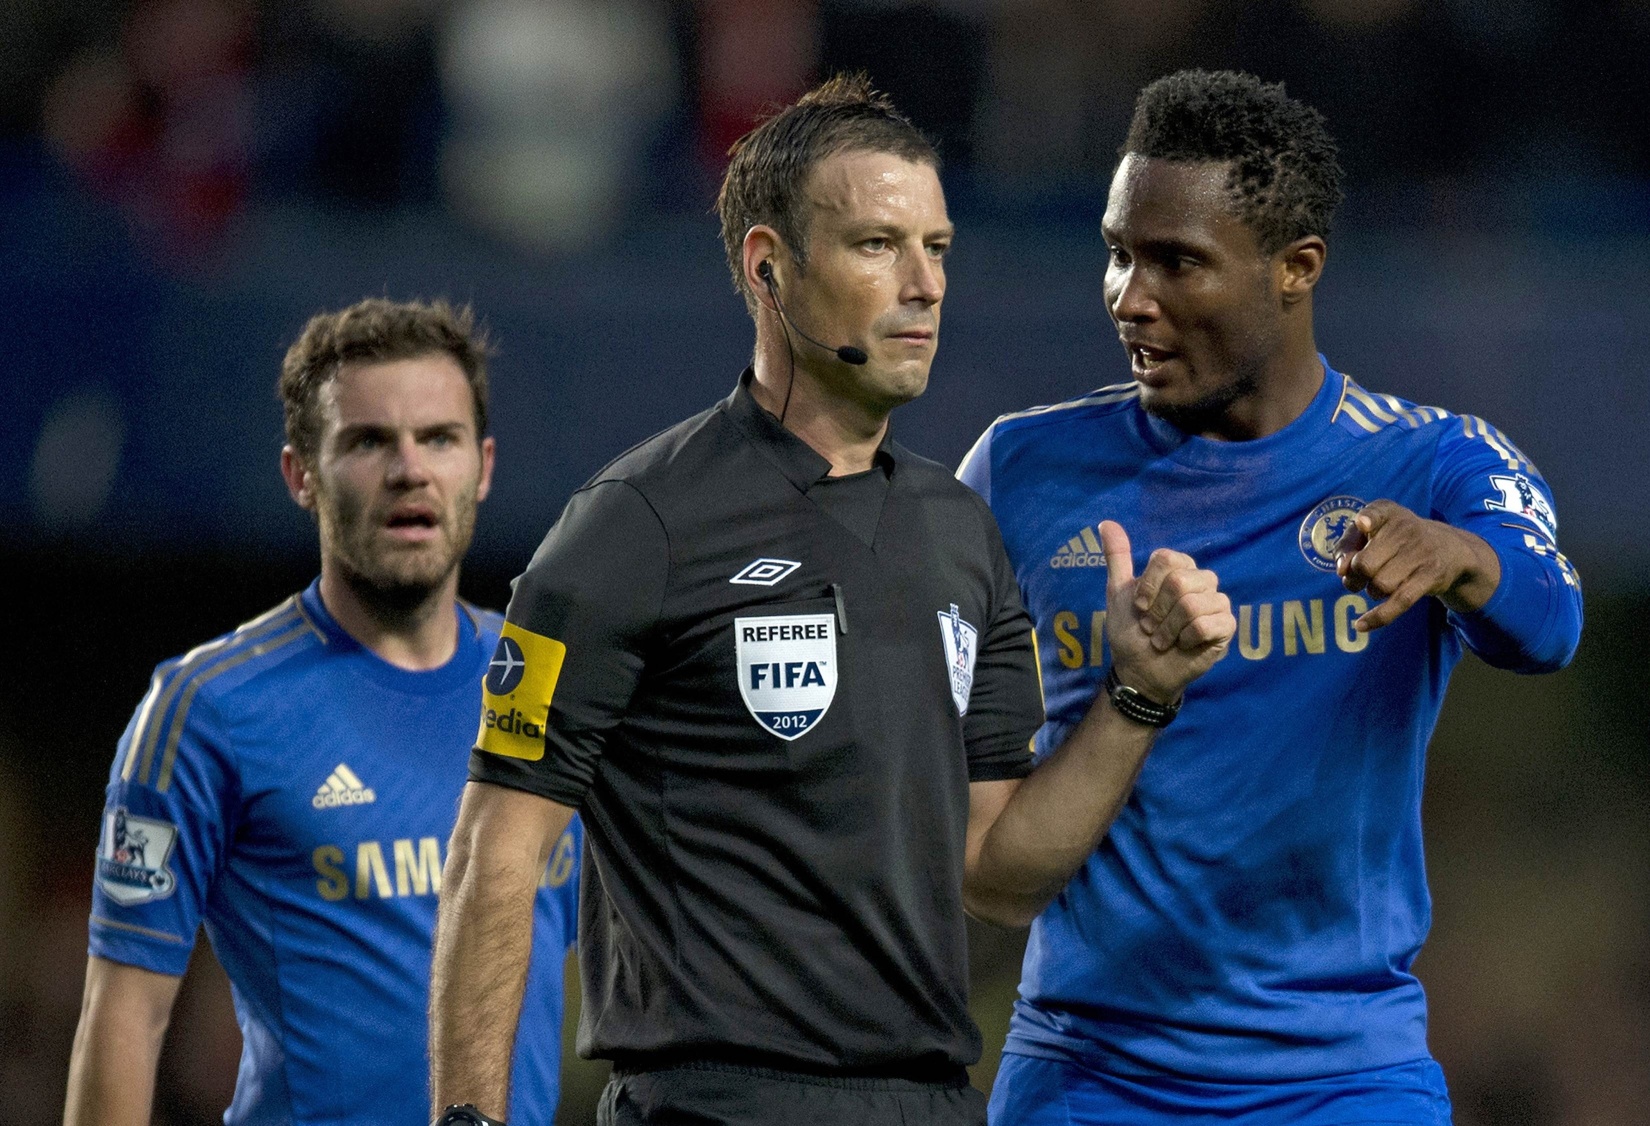 Chelsea's midfielder John Mikel Obi talking with referee Mark Clattenburg during a match against Manchester United earlier this month. There were complaints about racist comments during the game. Photo: AFP